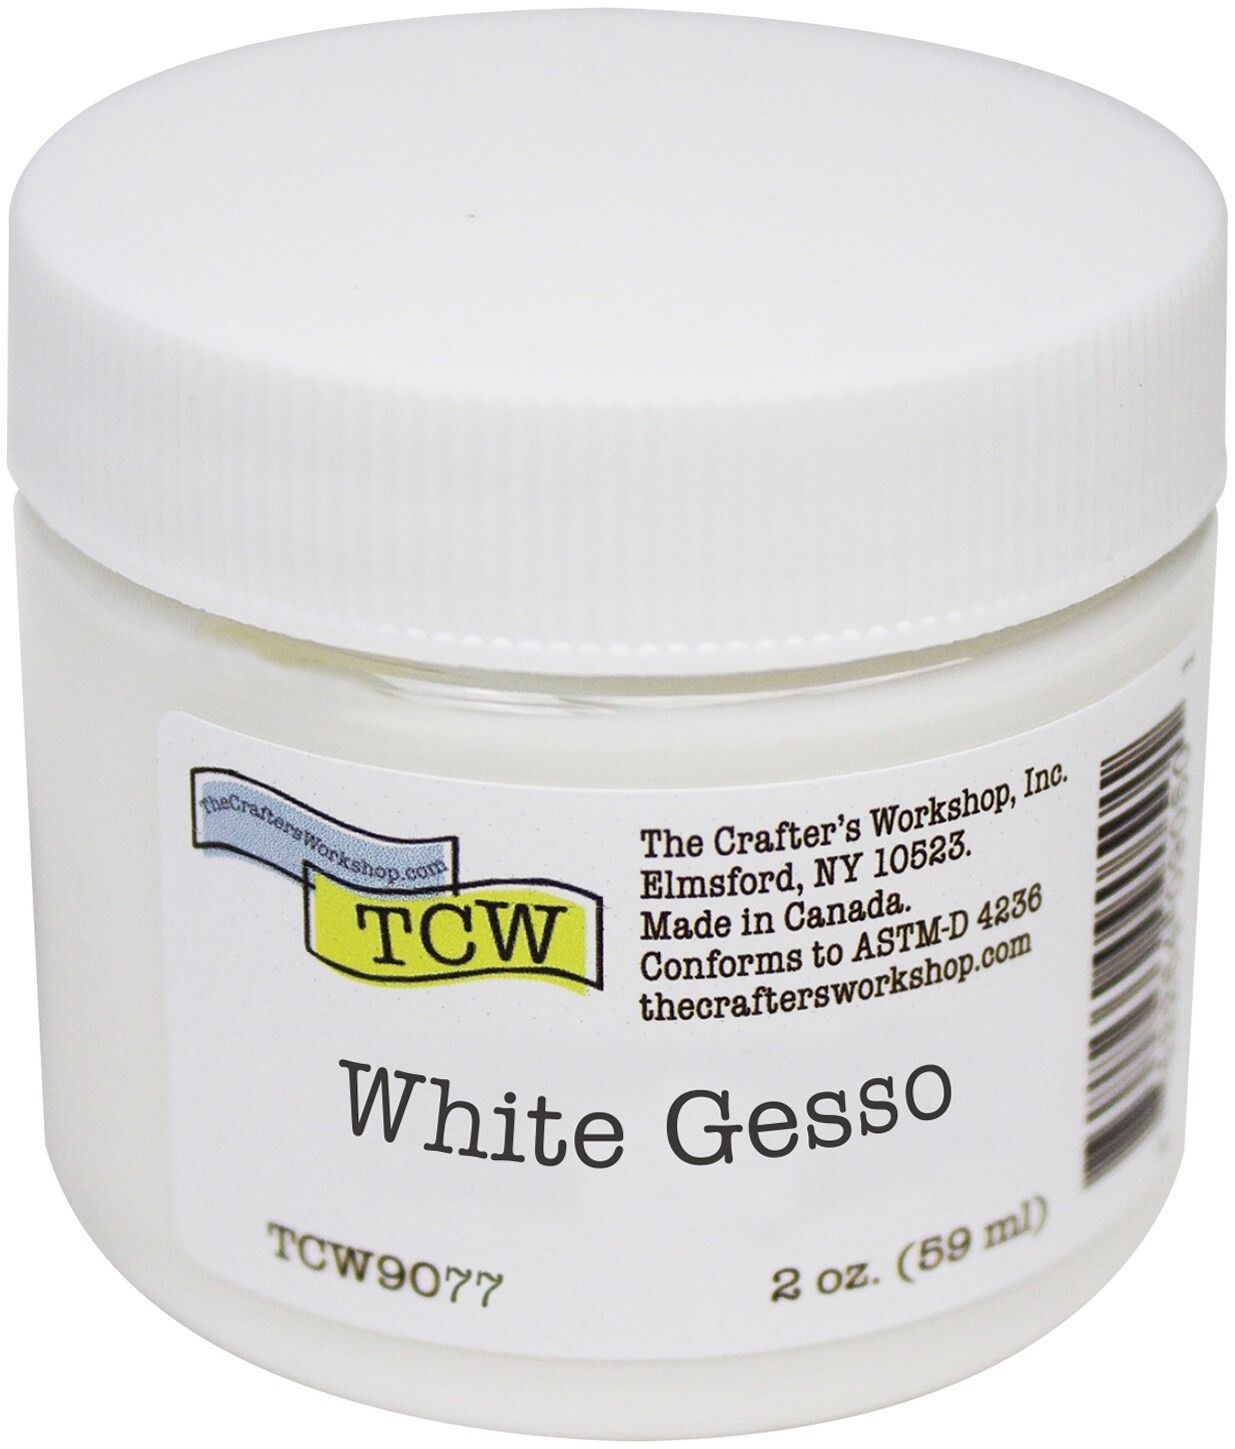  The Crafters Workshop Gesso Medium, Surface Preparation and  Primer, Sealer for Canvas, Paper, Wood, Provides Sizing for Acrylic or  Oils, Gesso, 8-oz, White